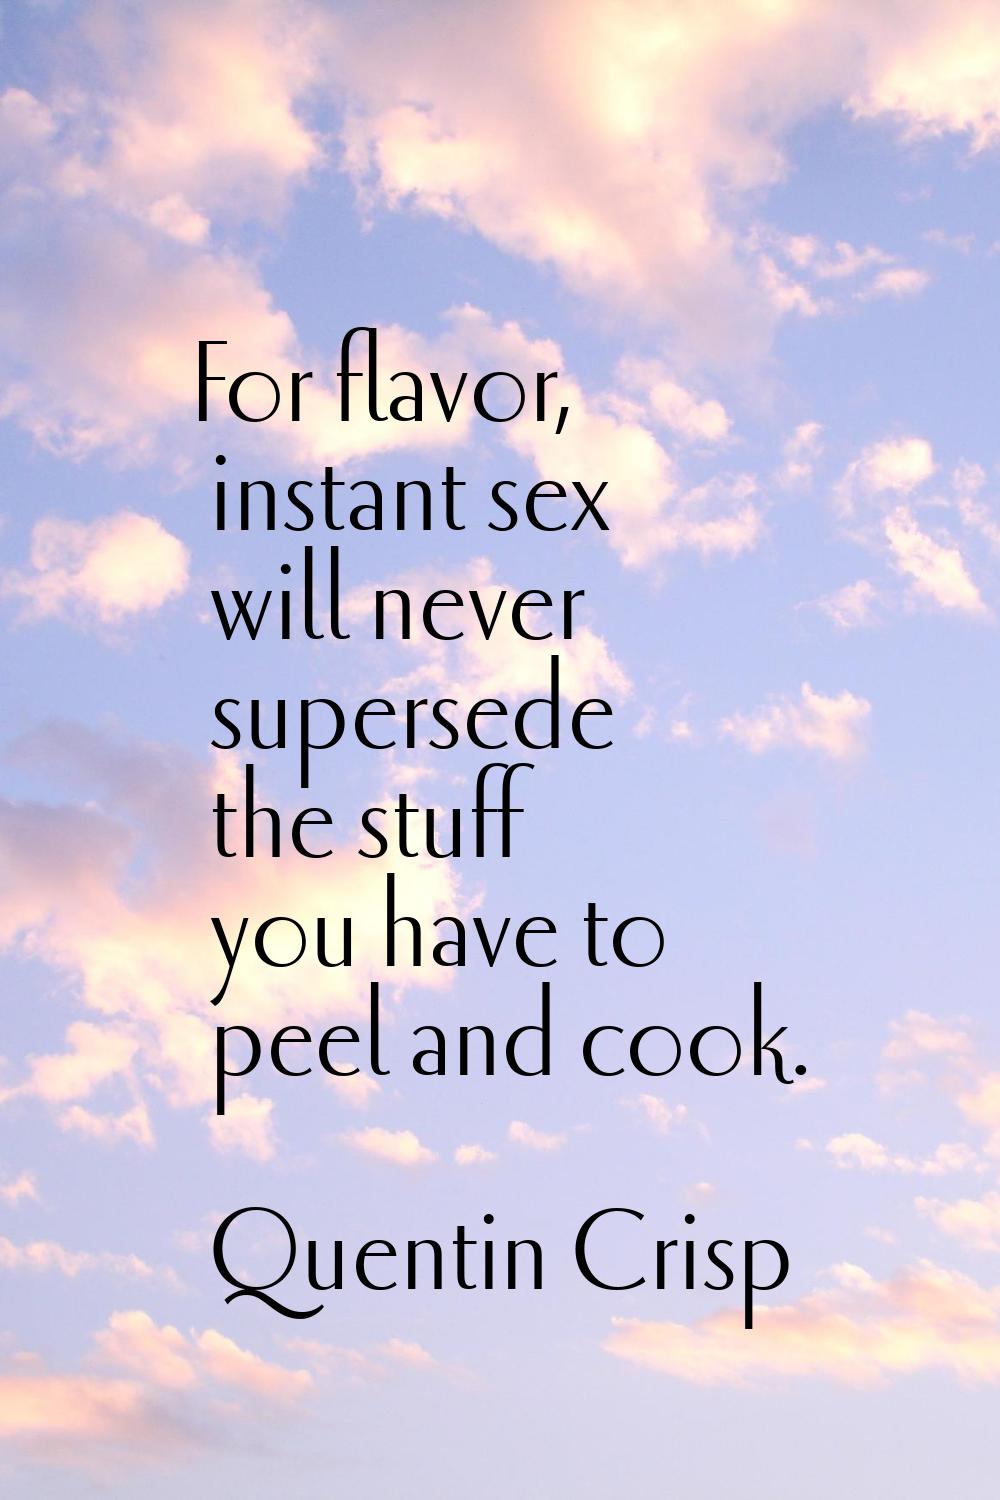 For flavor, instant sex will never supersede the stuff you have to peel and cook.